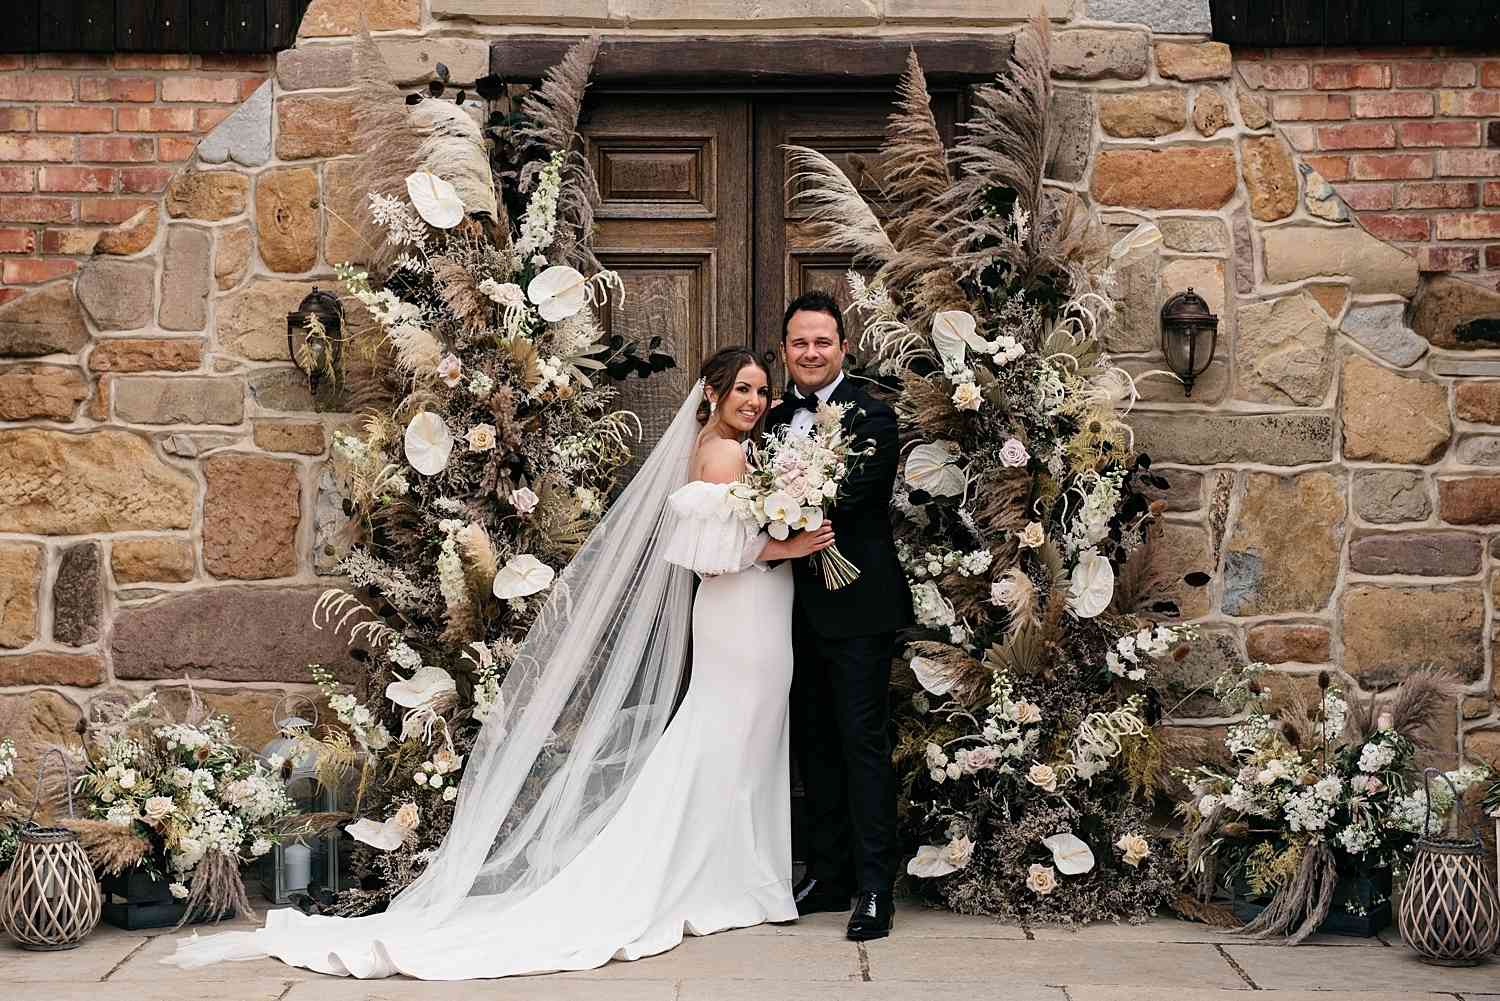 Bride And Groom Floral Archway